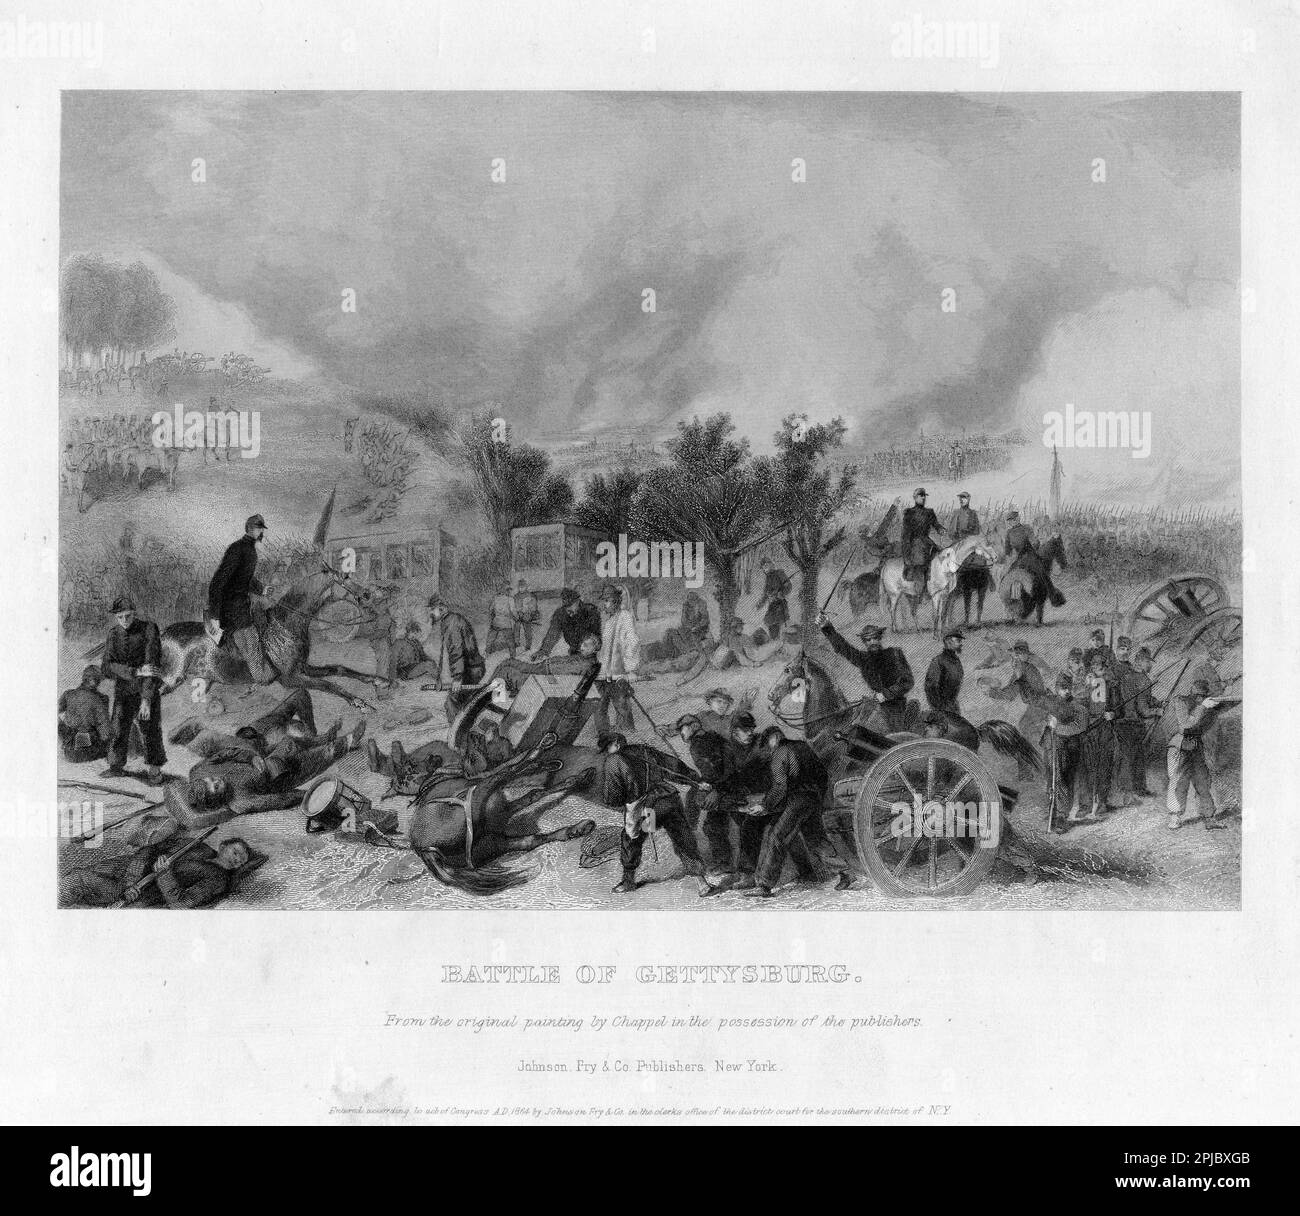 'Battle of Gettysburg.' Steel engraving by Alonzo Chappel. The Battle of Gettysberg represented the end of the Confederate troops northern movement and their defeat at Gettysburg is often seen as the turning point of the war. The battle saw 200,000 men meet in combat, with a combined death count of 8000. Stock Photo